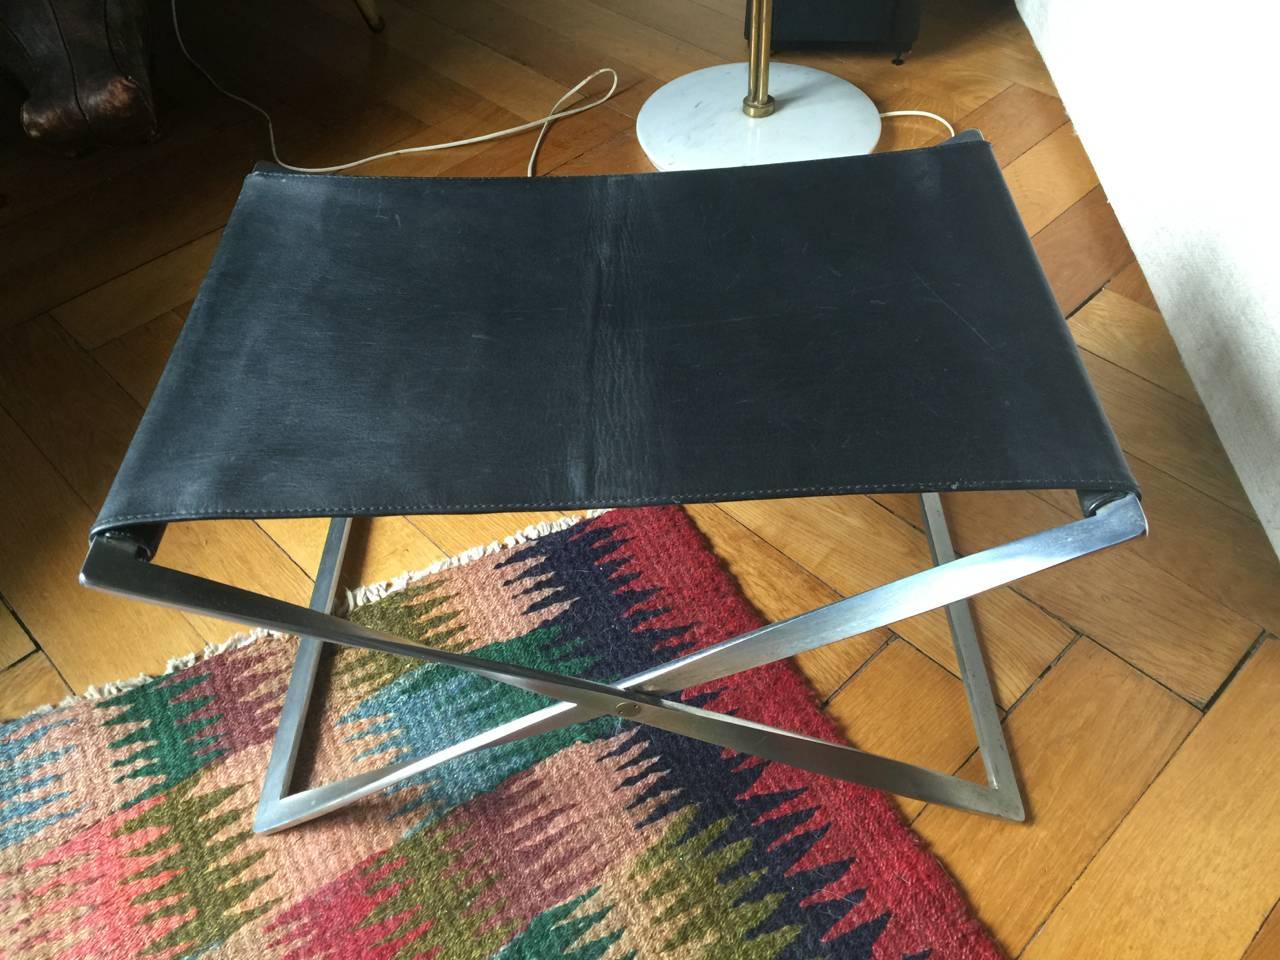 Rare and early folding stool in 100% original and perfect condition. Matt chromed forged steel with welded corners. Recognize the zig-zag steps of the early production! Original and early ivan schlechter leather !!

LOCATED IN HAMBURG